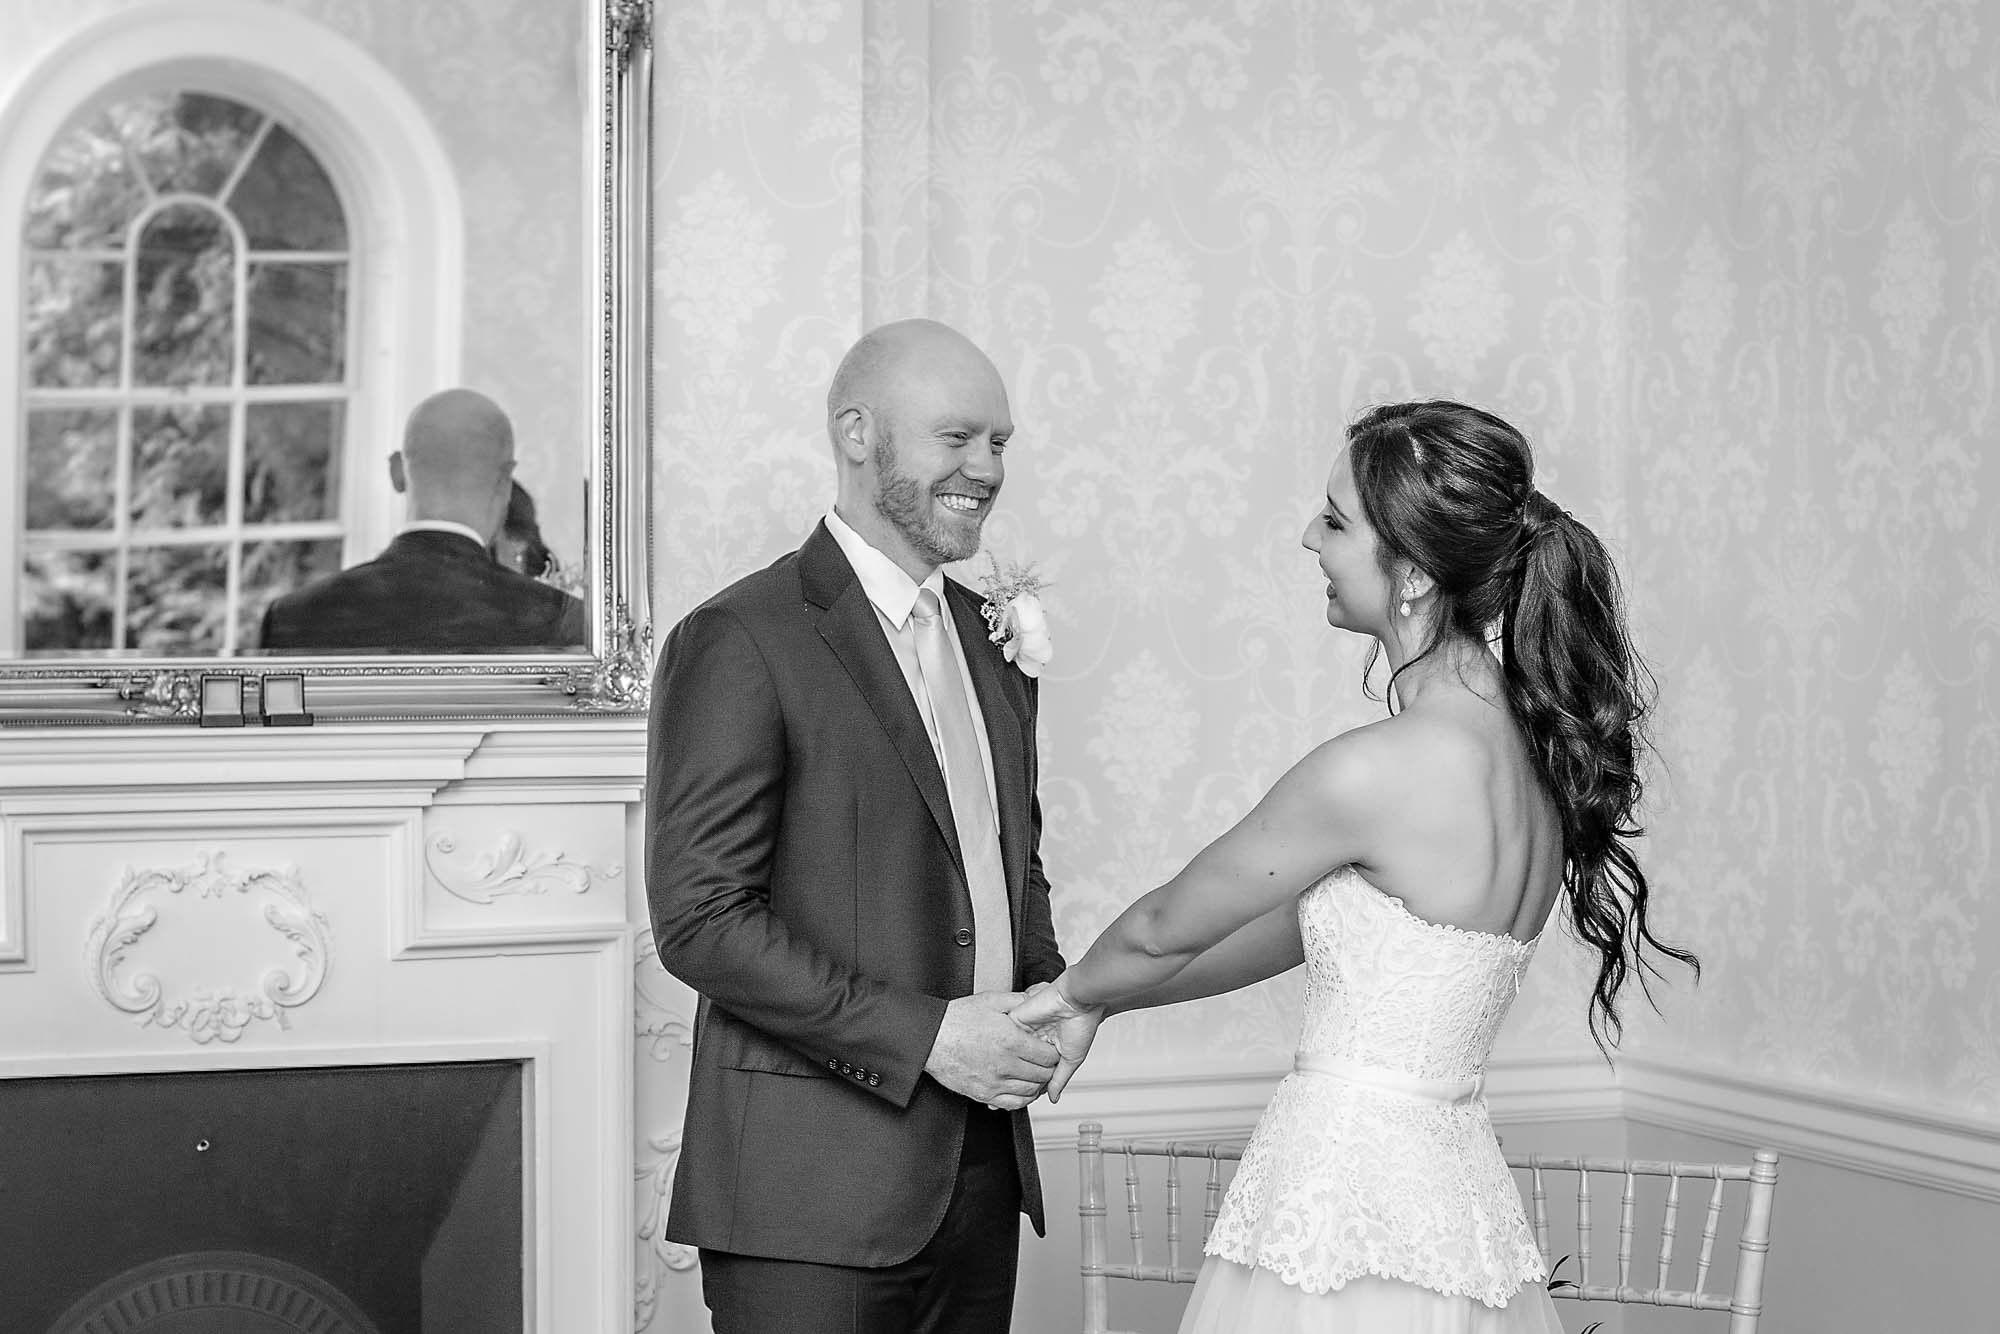 The bride and groom holding hands and smiling in the Sheridan Room at Morden Park House